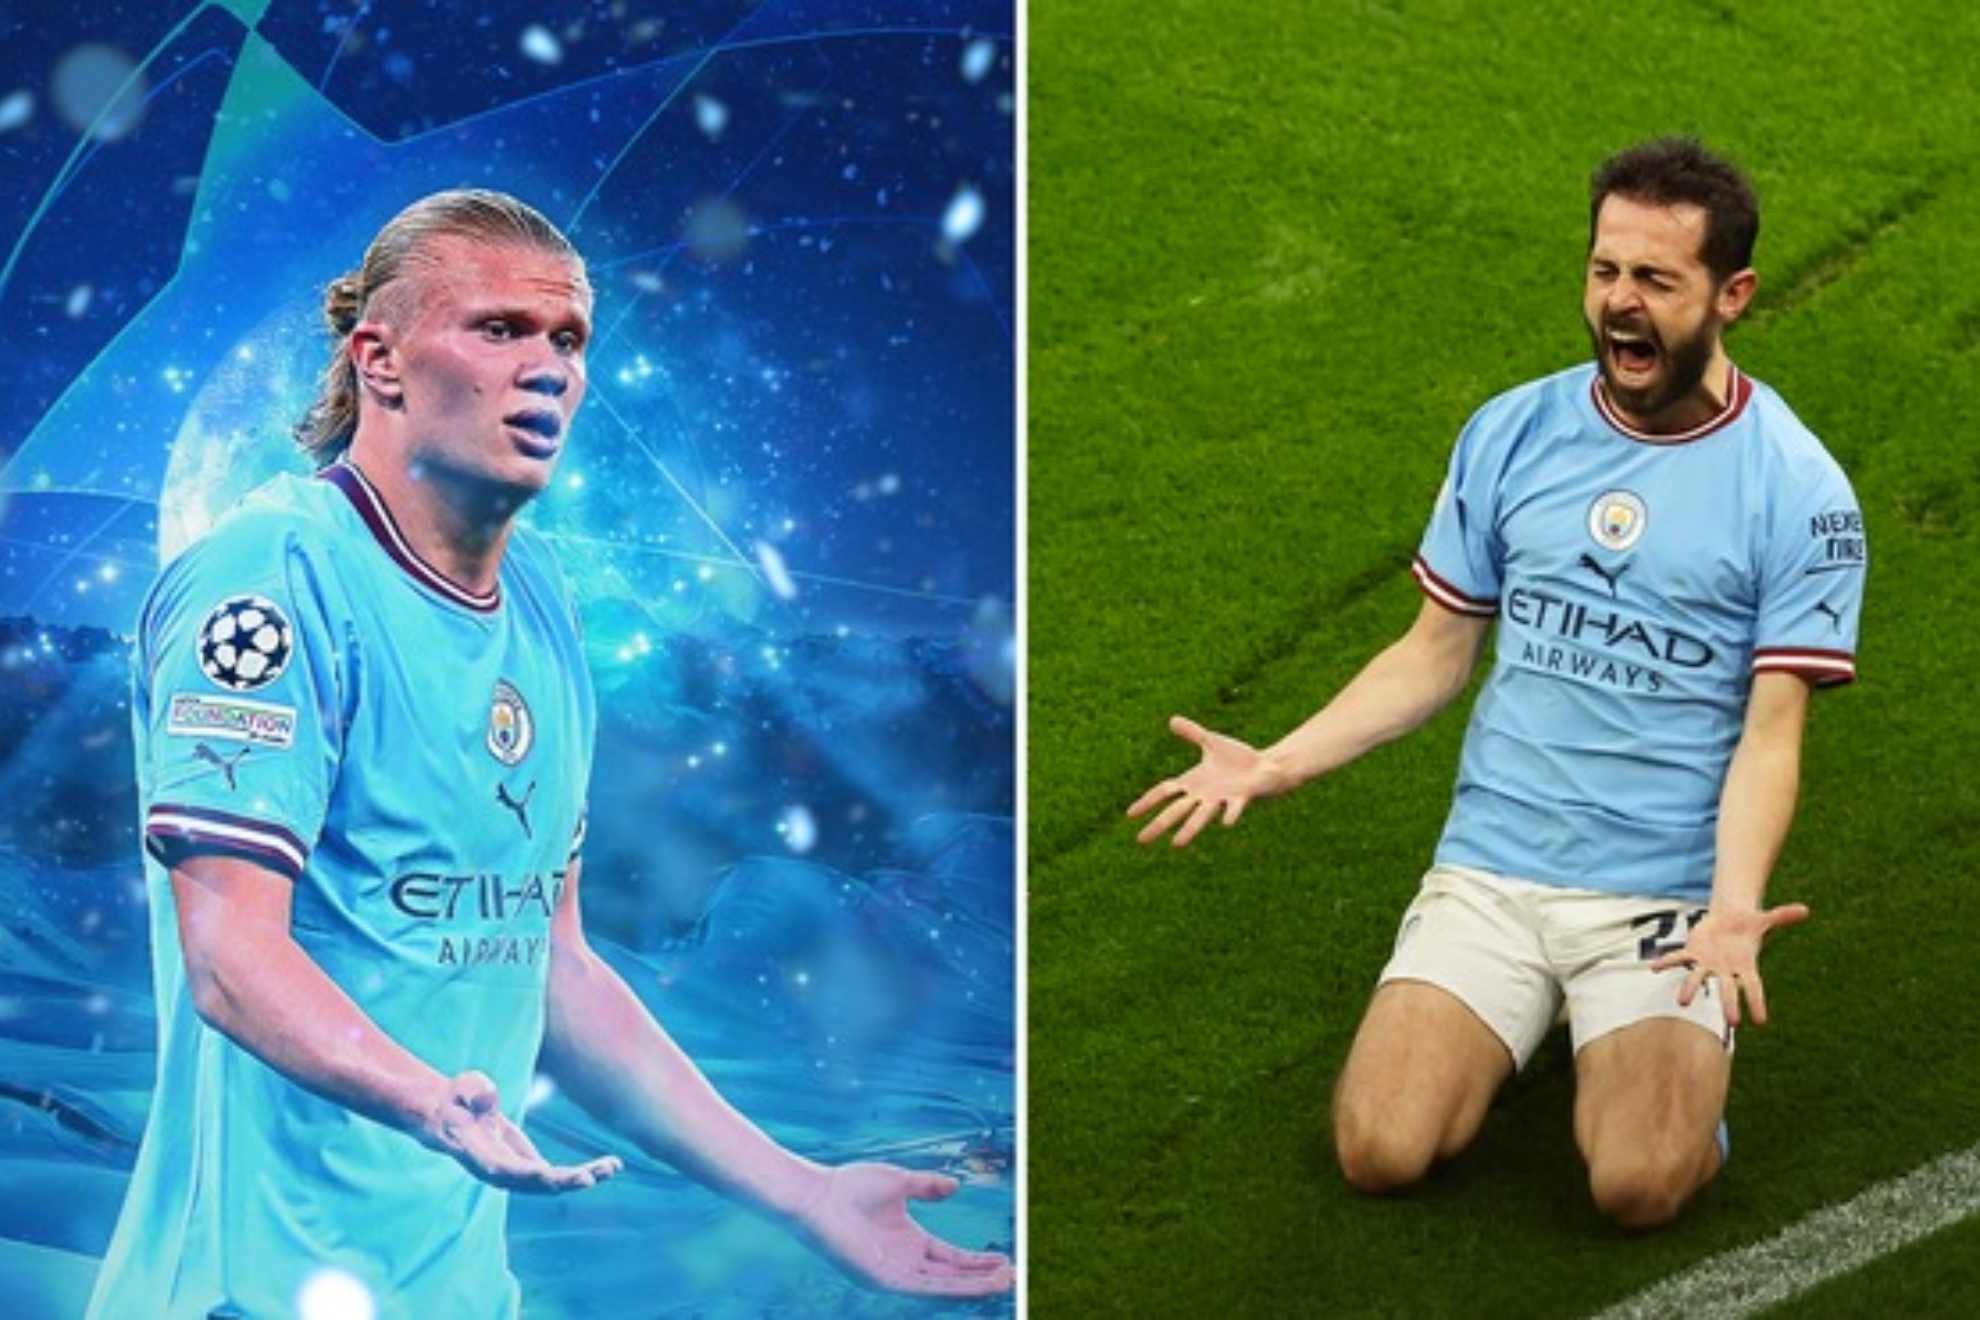 Erling Haaland hasn't scored in a while, should Manchester City be worried?